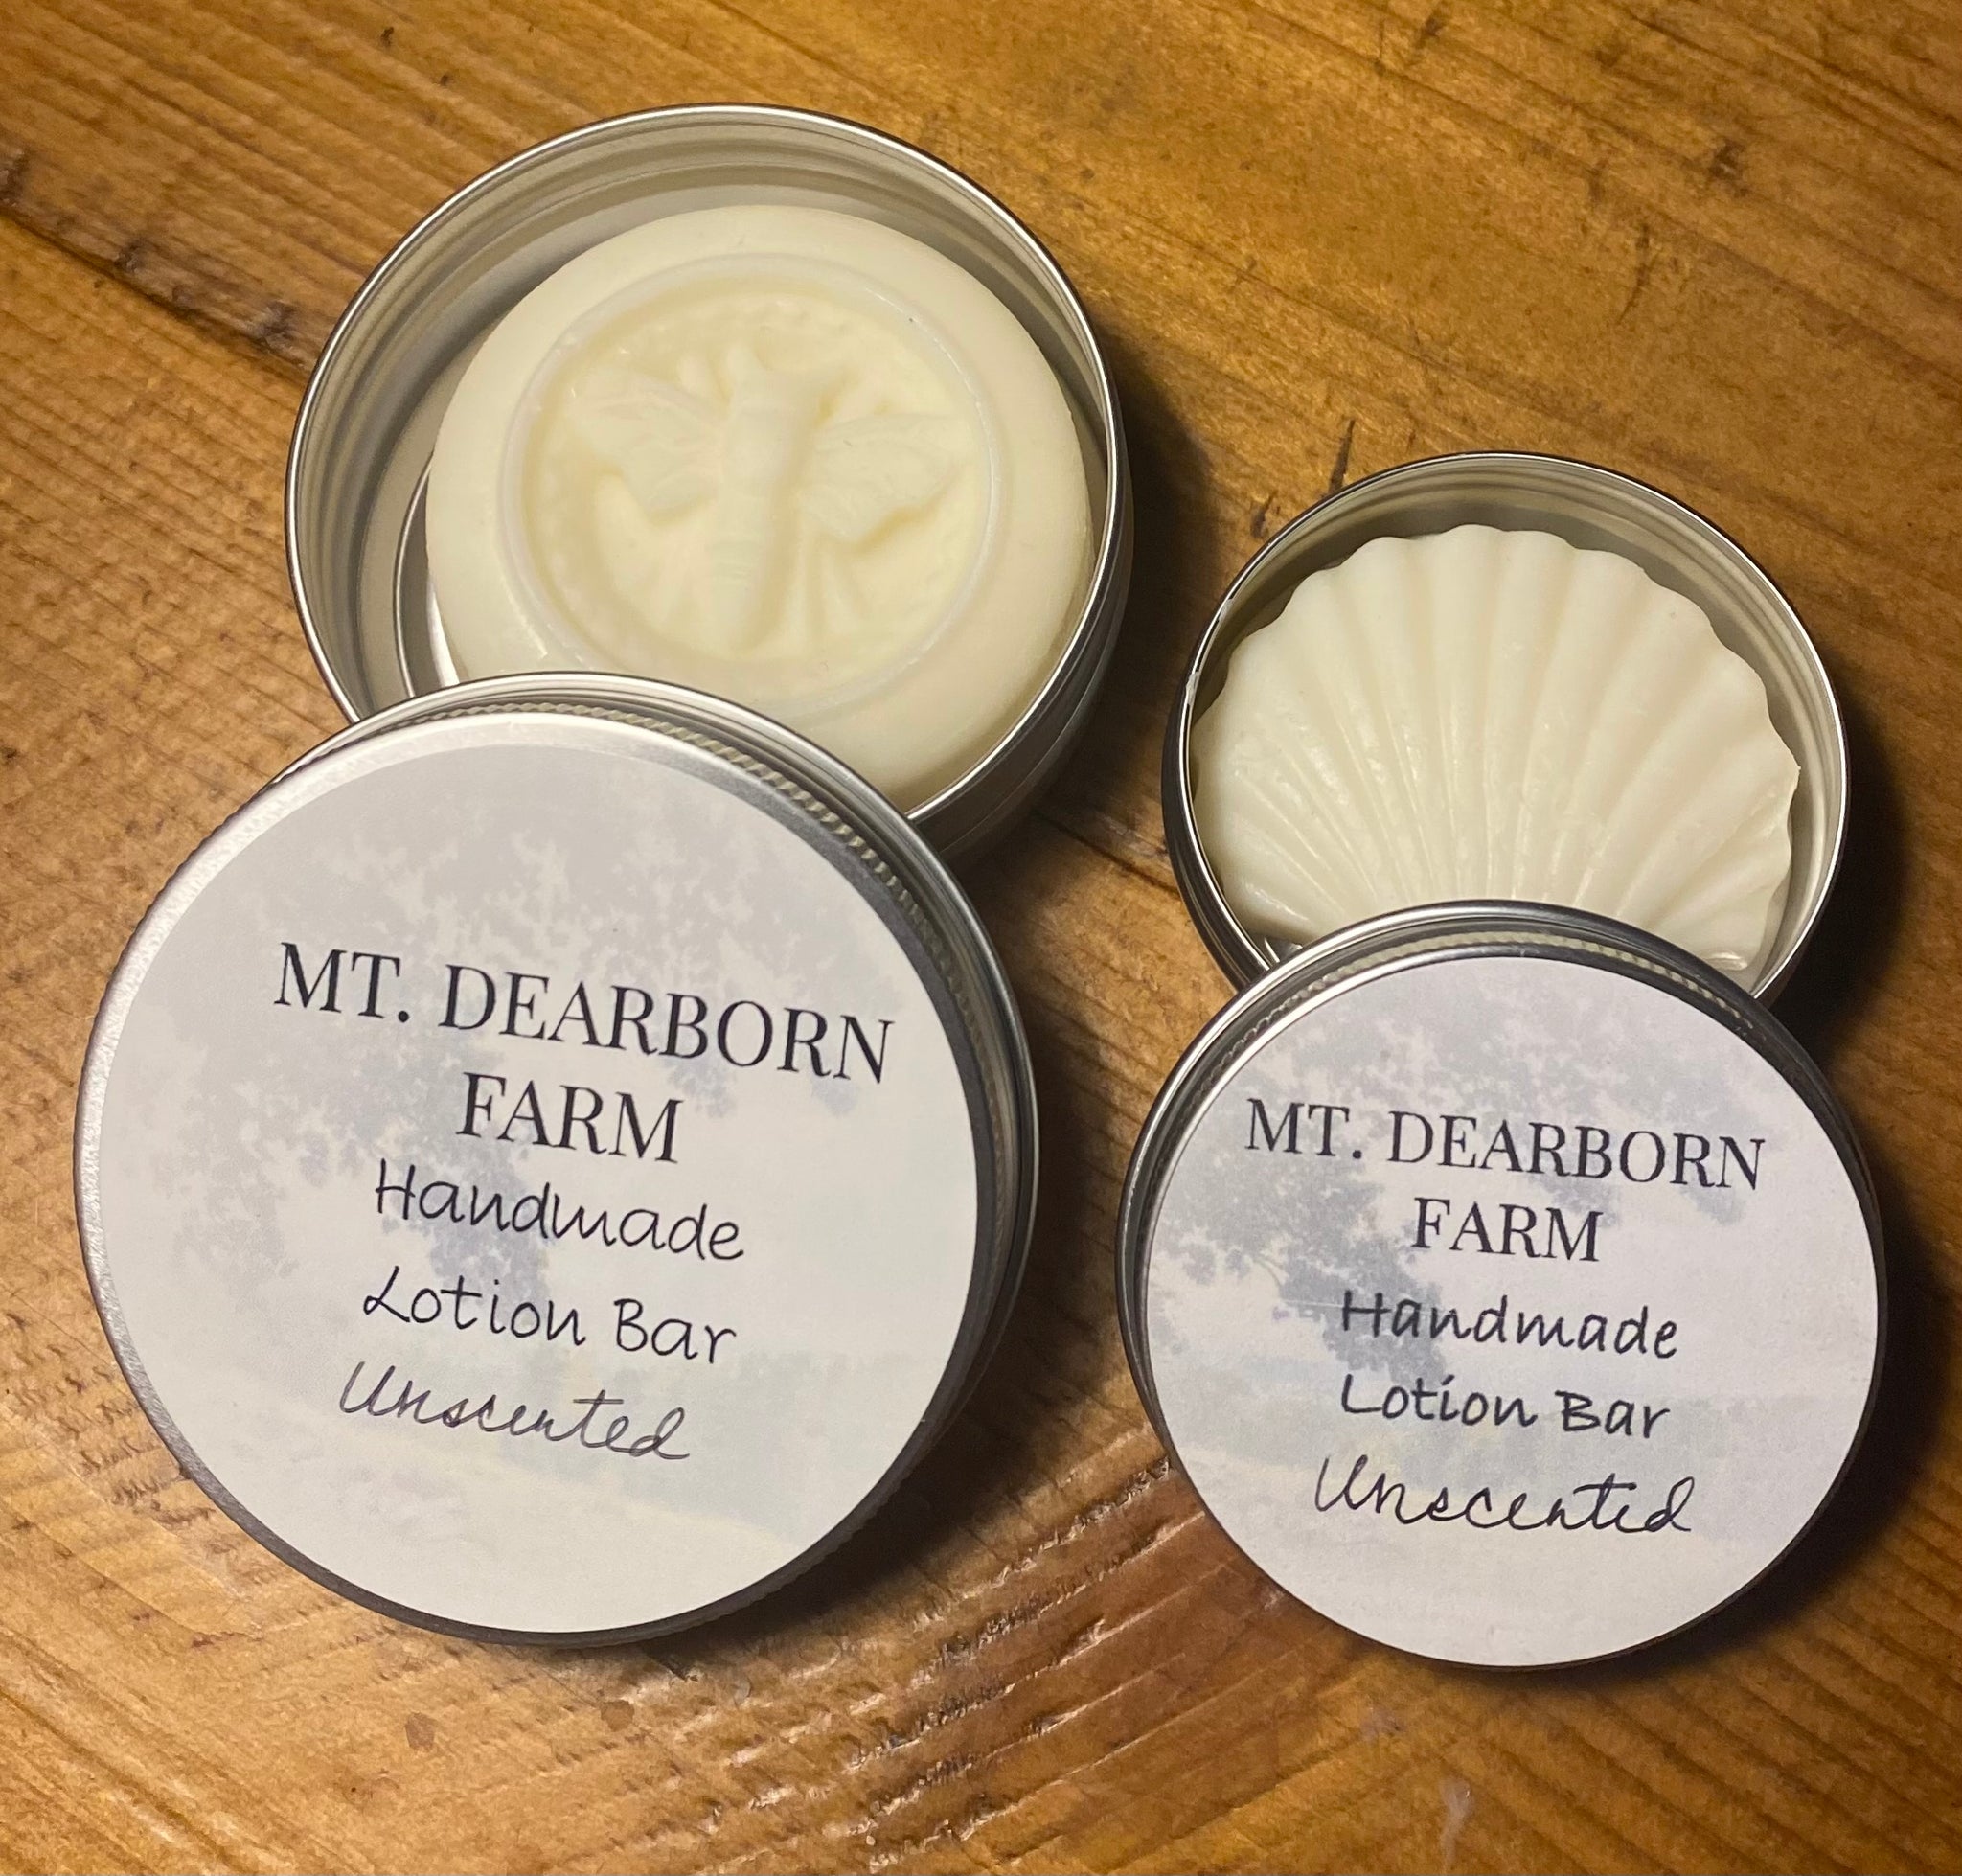 Lotion Bar - made with beeswax, coconut oil, and cocoa butter, 1 oz. —  Honeyrun Farm